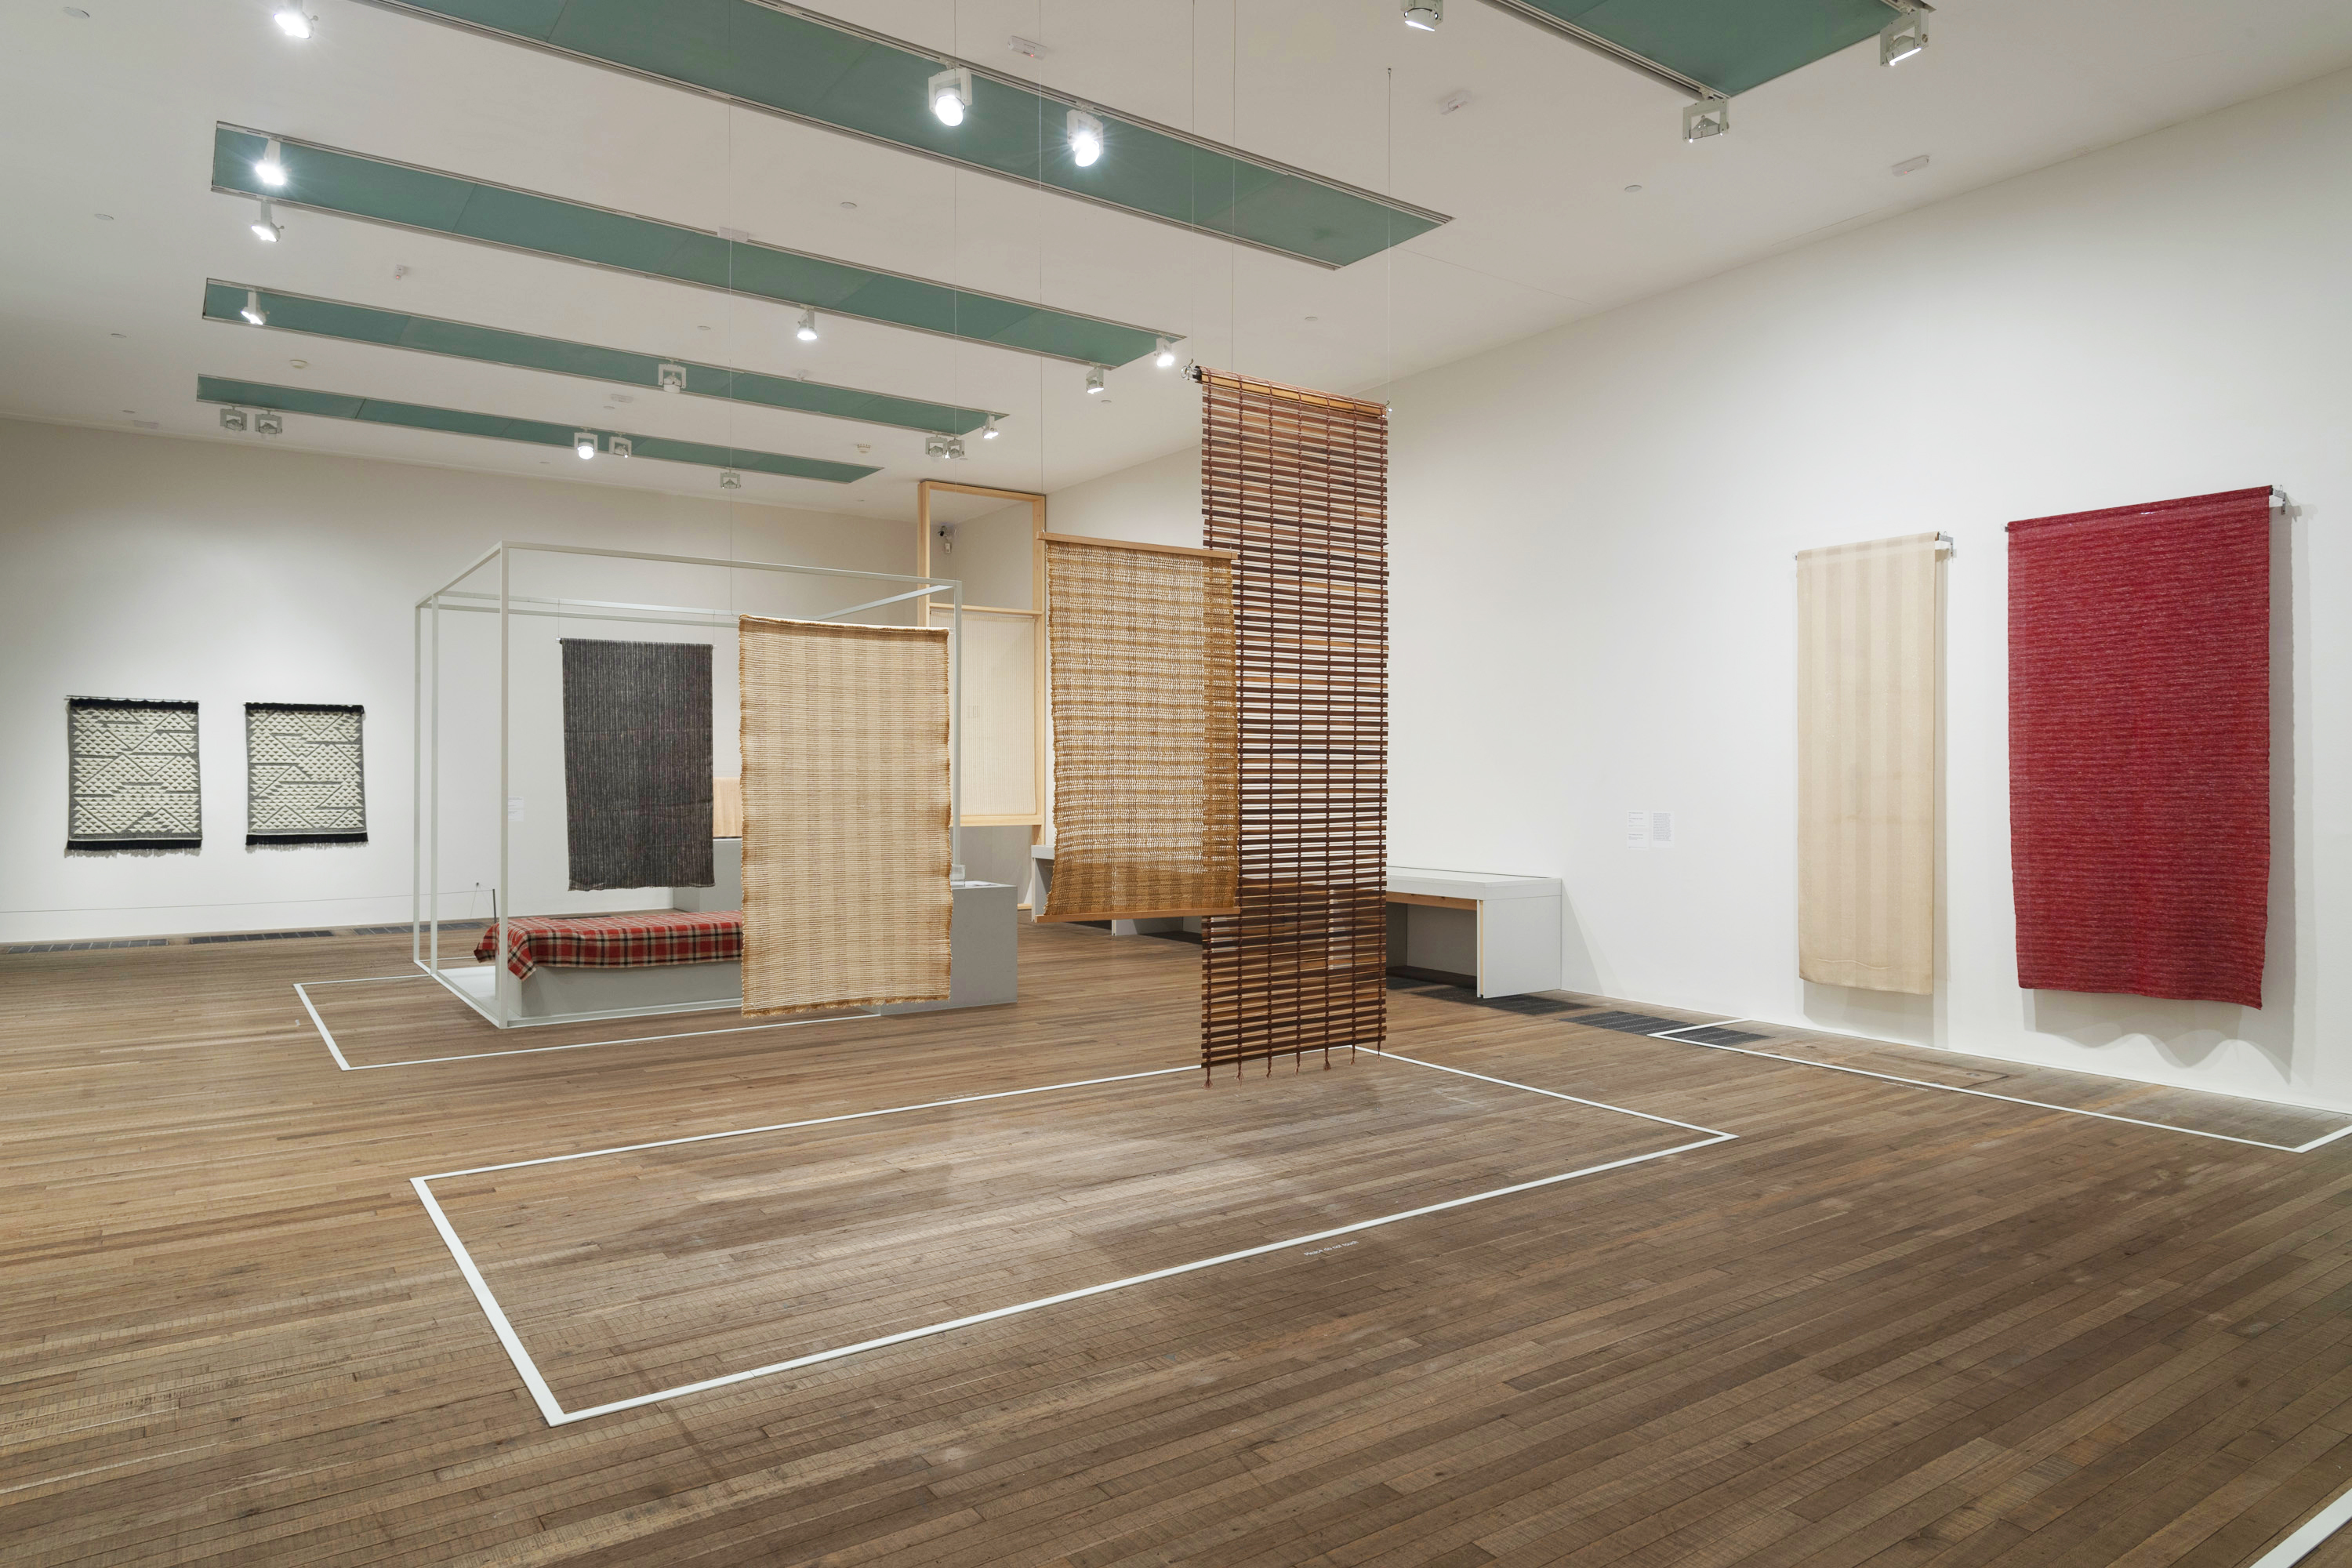 "Installation view of Anni Albers at Tate Modern" 2018 Image Courtesy of the Josef and Anni Albers Foundation